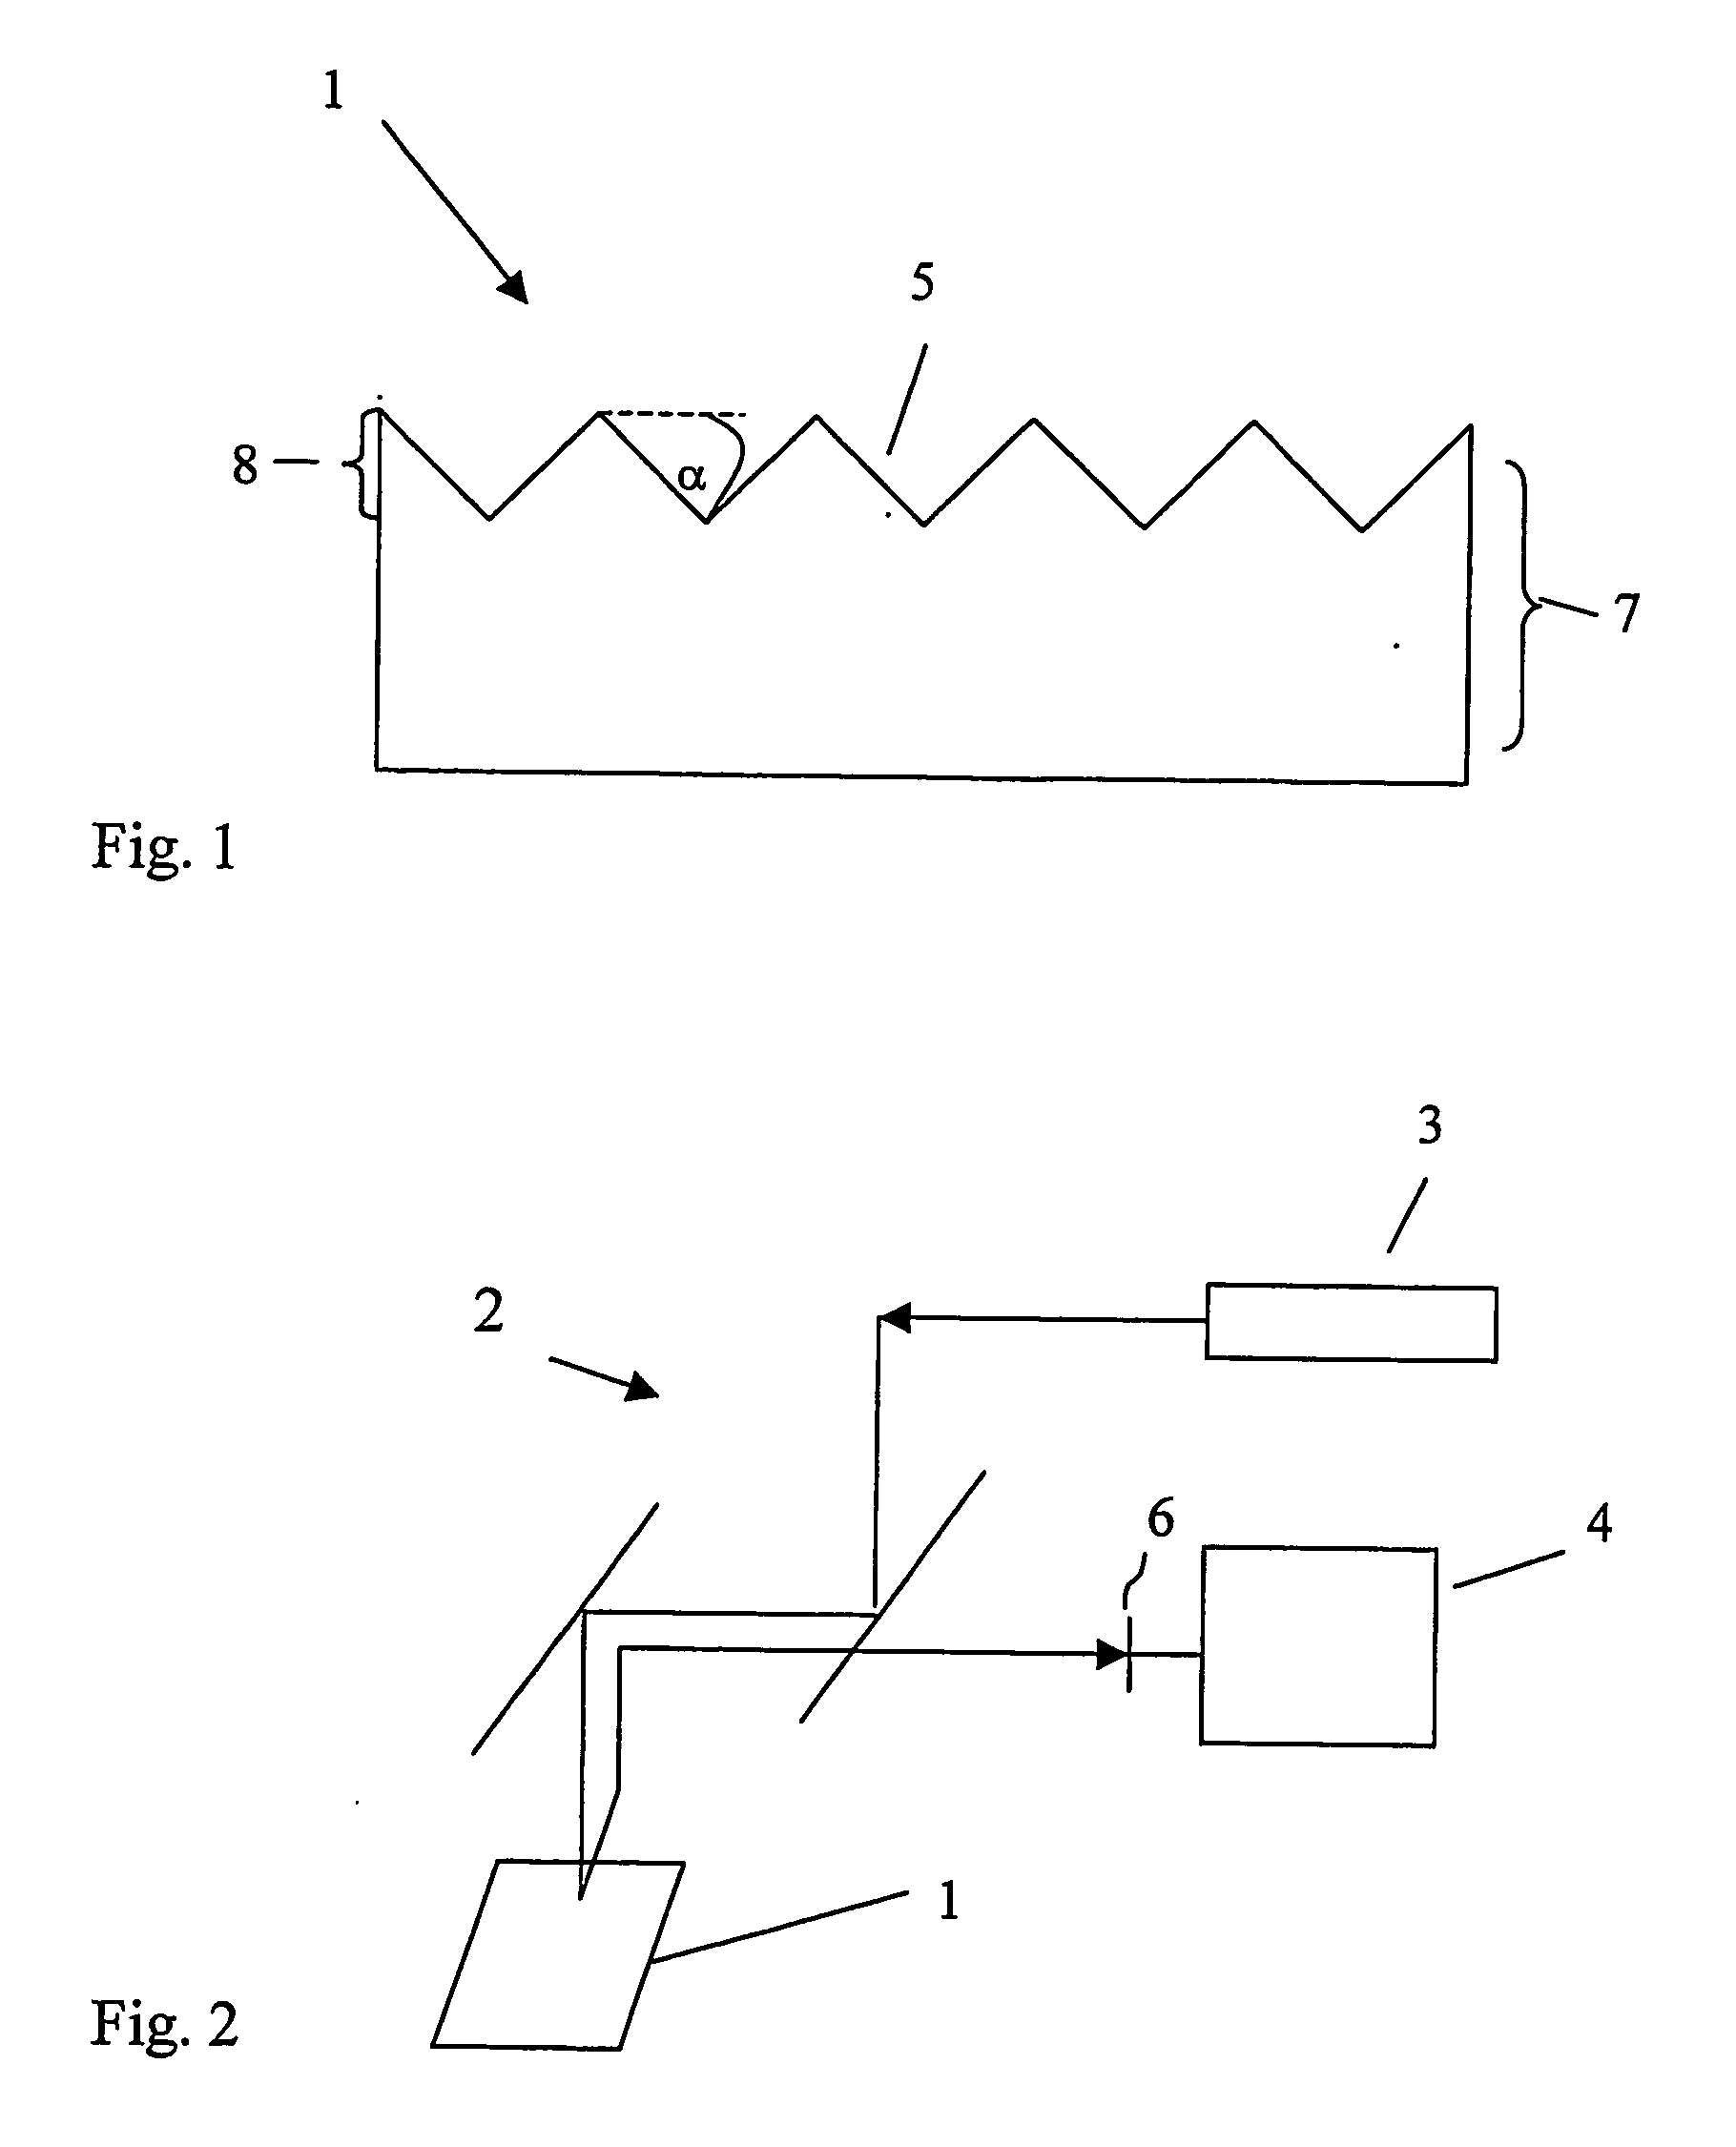 Polymeric microarray support, method of forming microfeatures on an optical assay arrangement